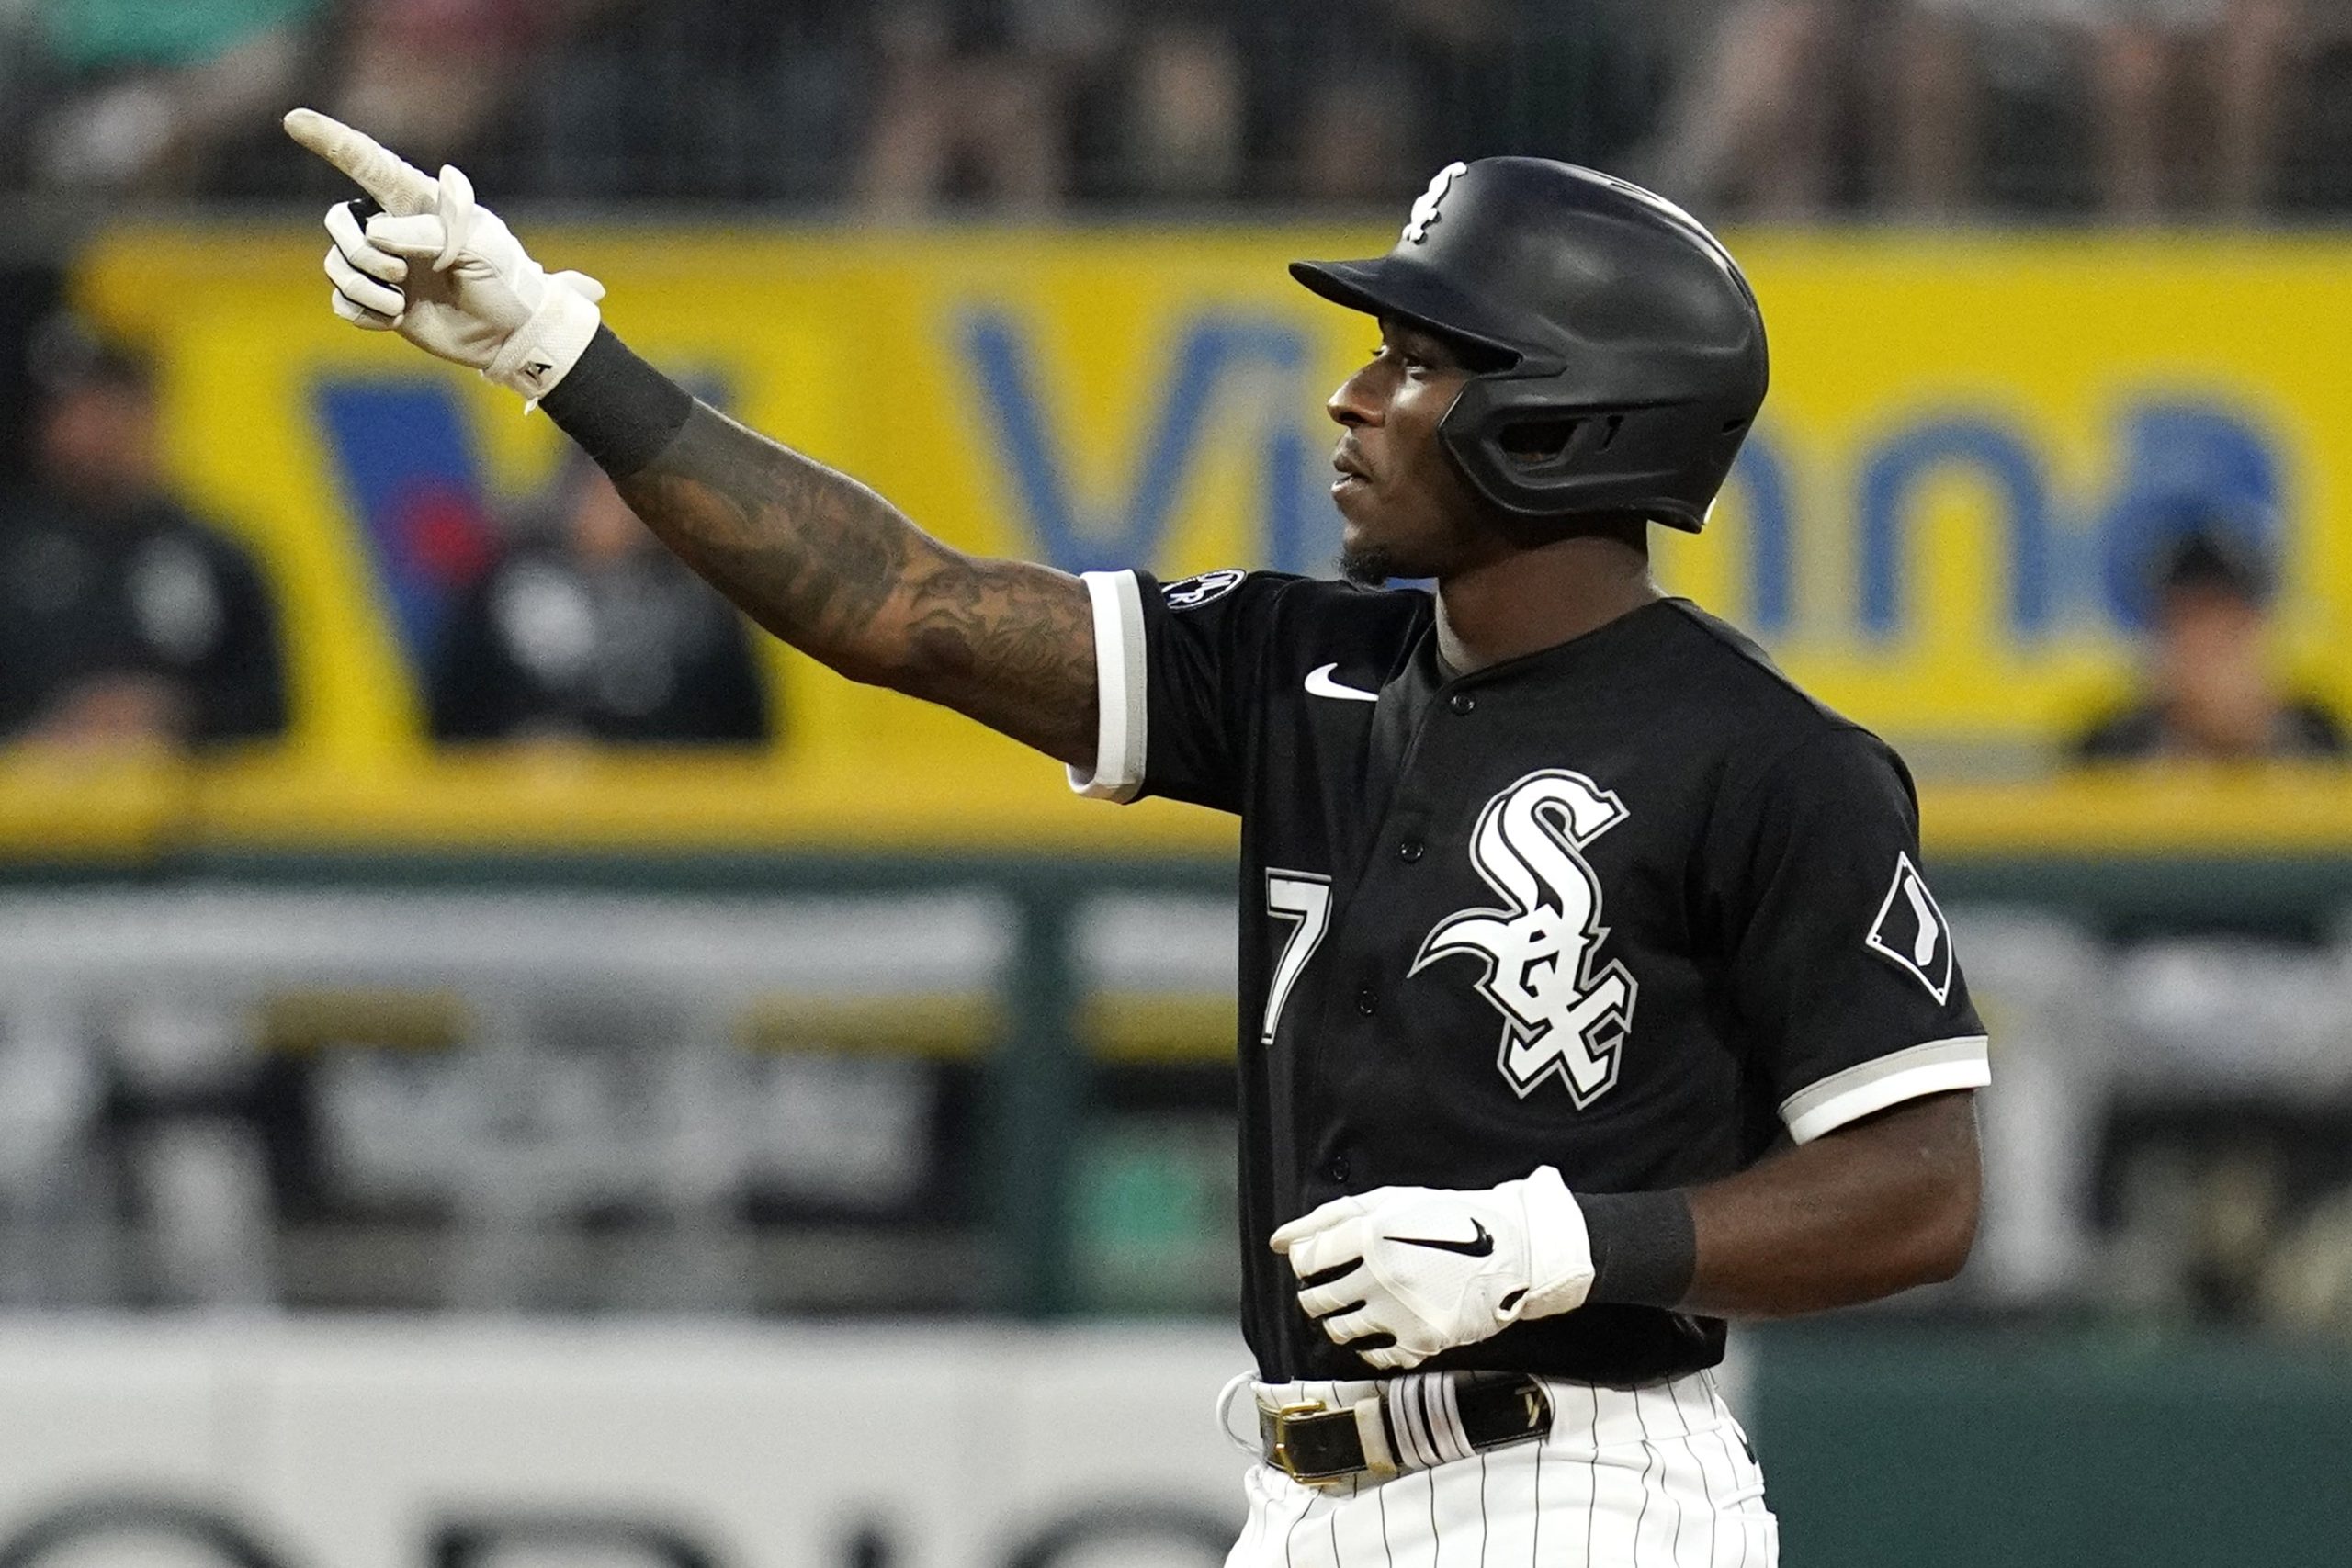 Chicago White Sox's Tim Anderson smiles as he points to the dugout after hitting a double during the sixth inning of the team's baseball game against the Houston Astros in Chicago, Saturday, July 17, 2021.